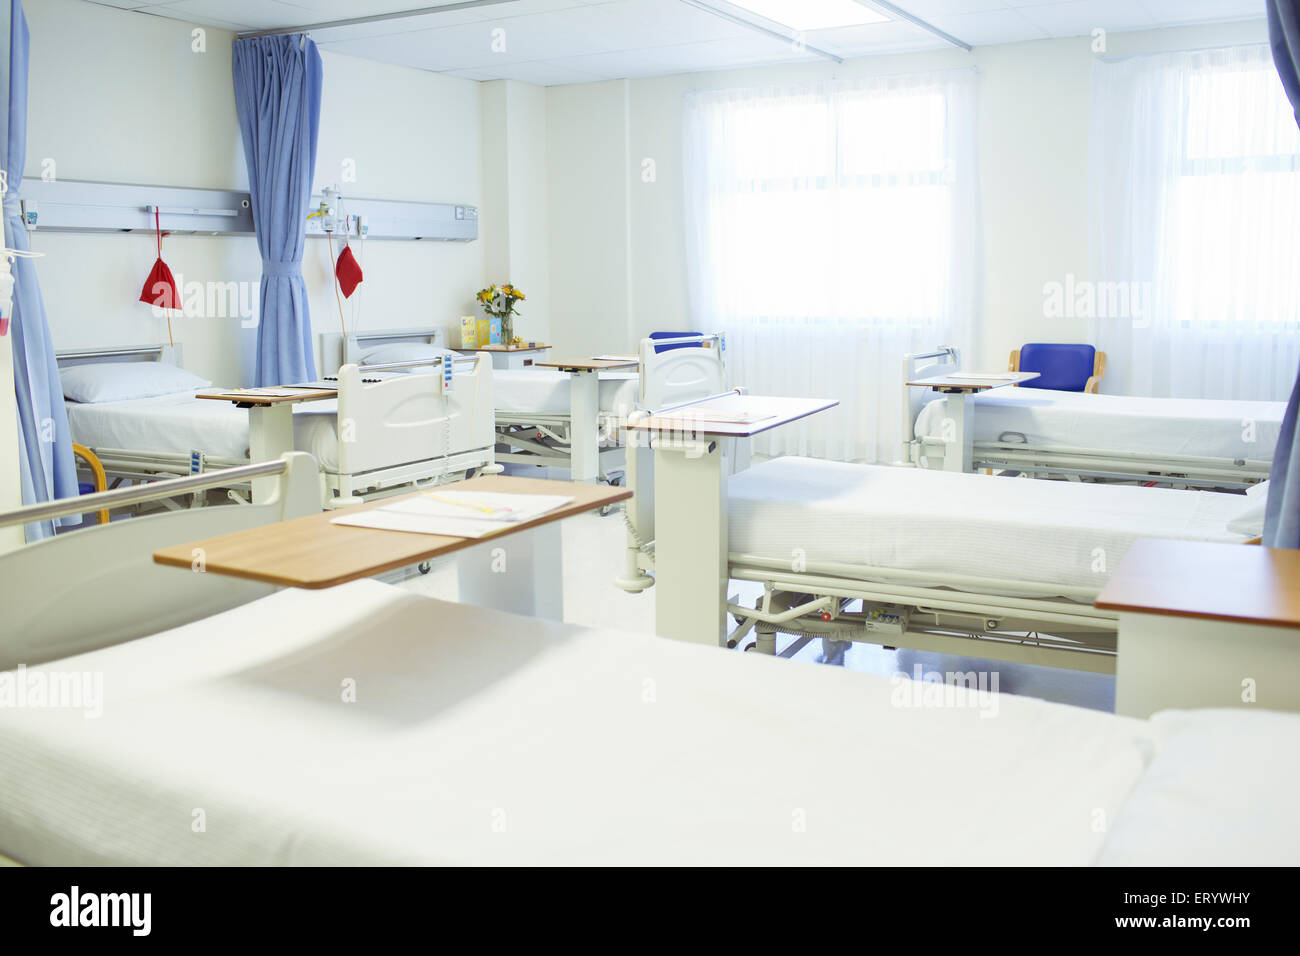 Beds ready in empty hospital room Stock Photo